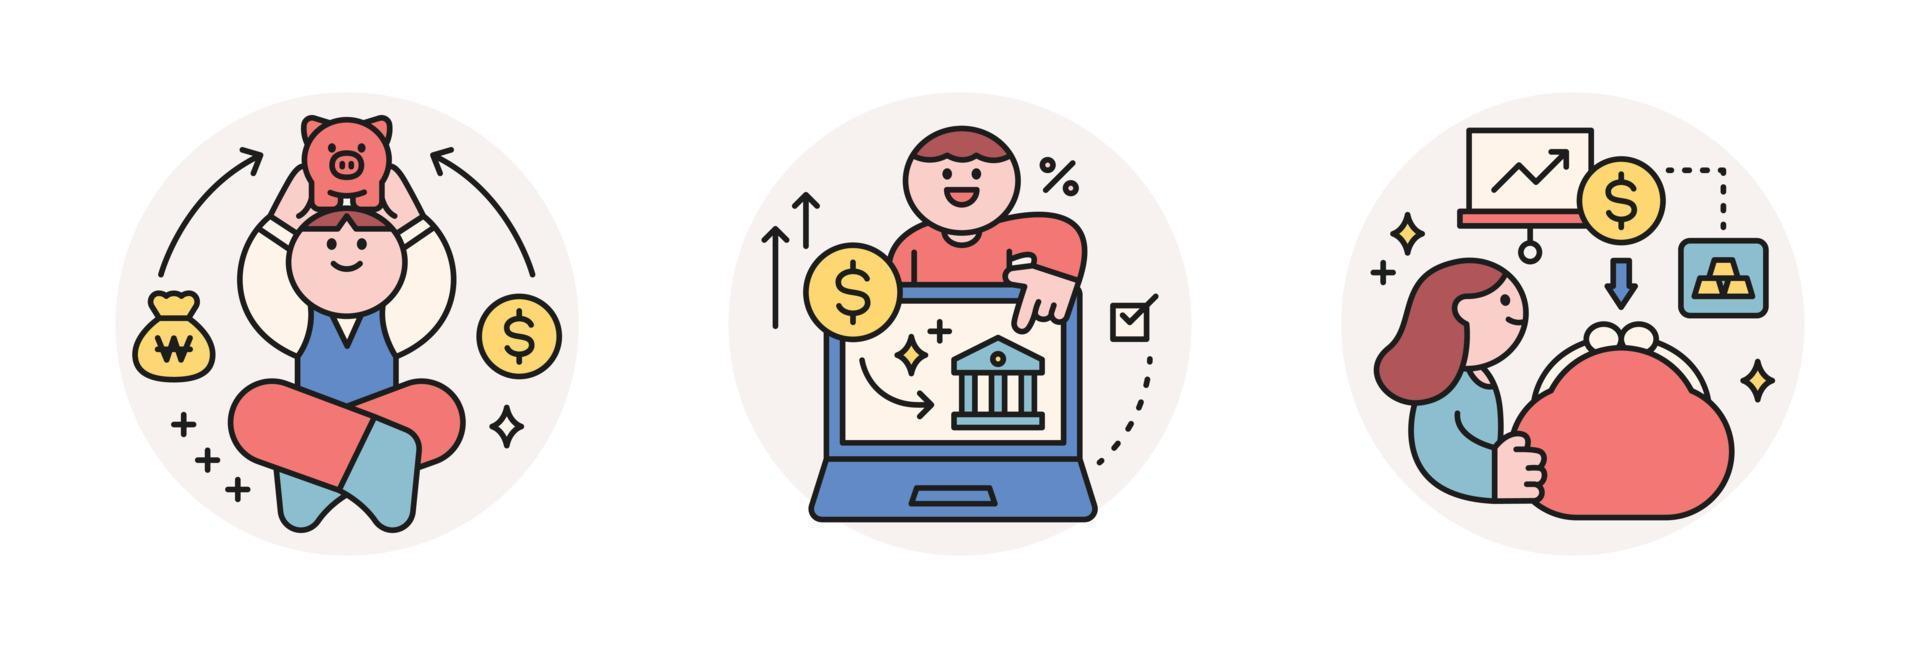 Finance and people, accounts for household economic growth, investment plan management. Piggy bank, wallet, online banking. Vector illustration.